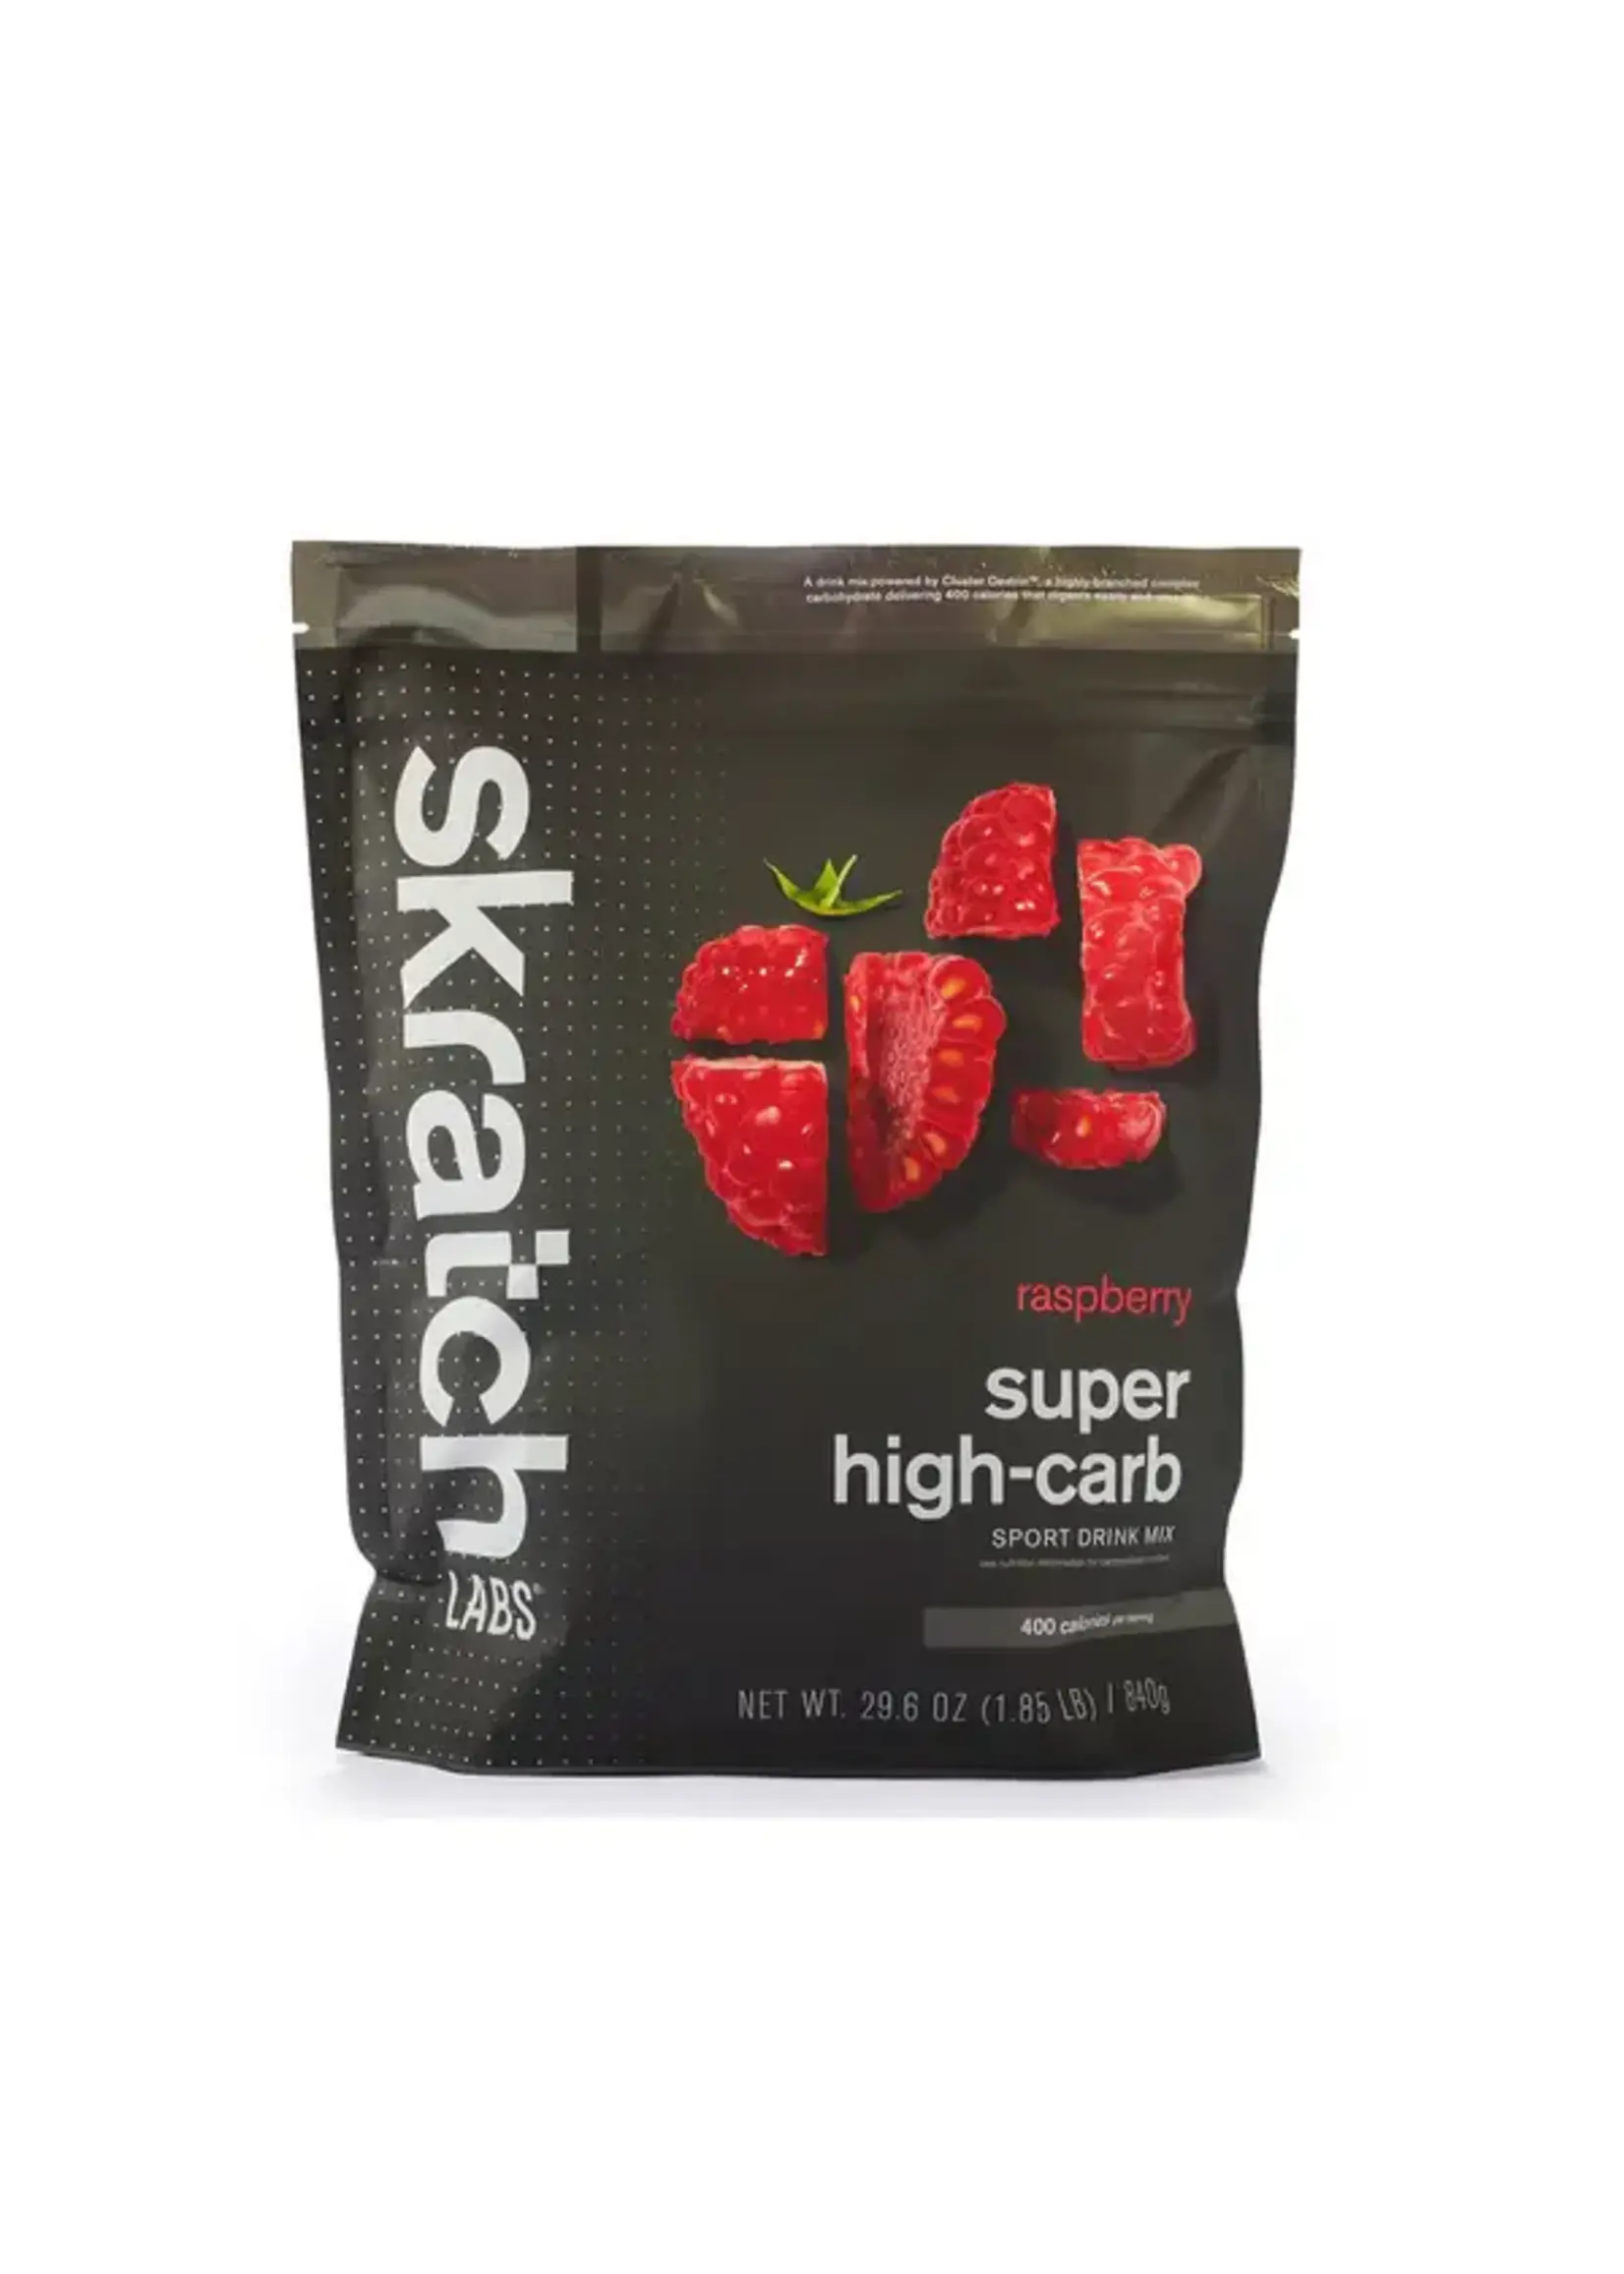 Skratch Labs Super High-Carb Sport Drink Mix, Raspberry, 840g, 8-Serving Resealable Pouch